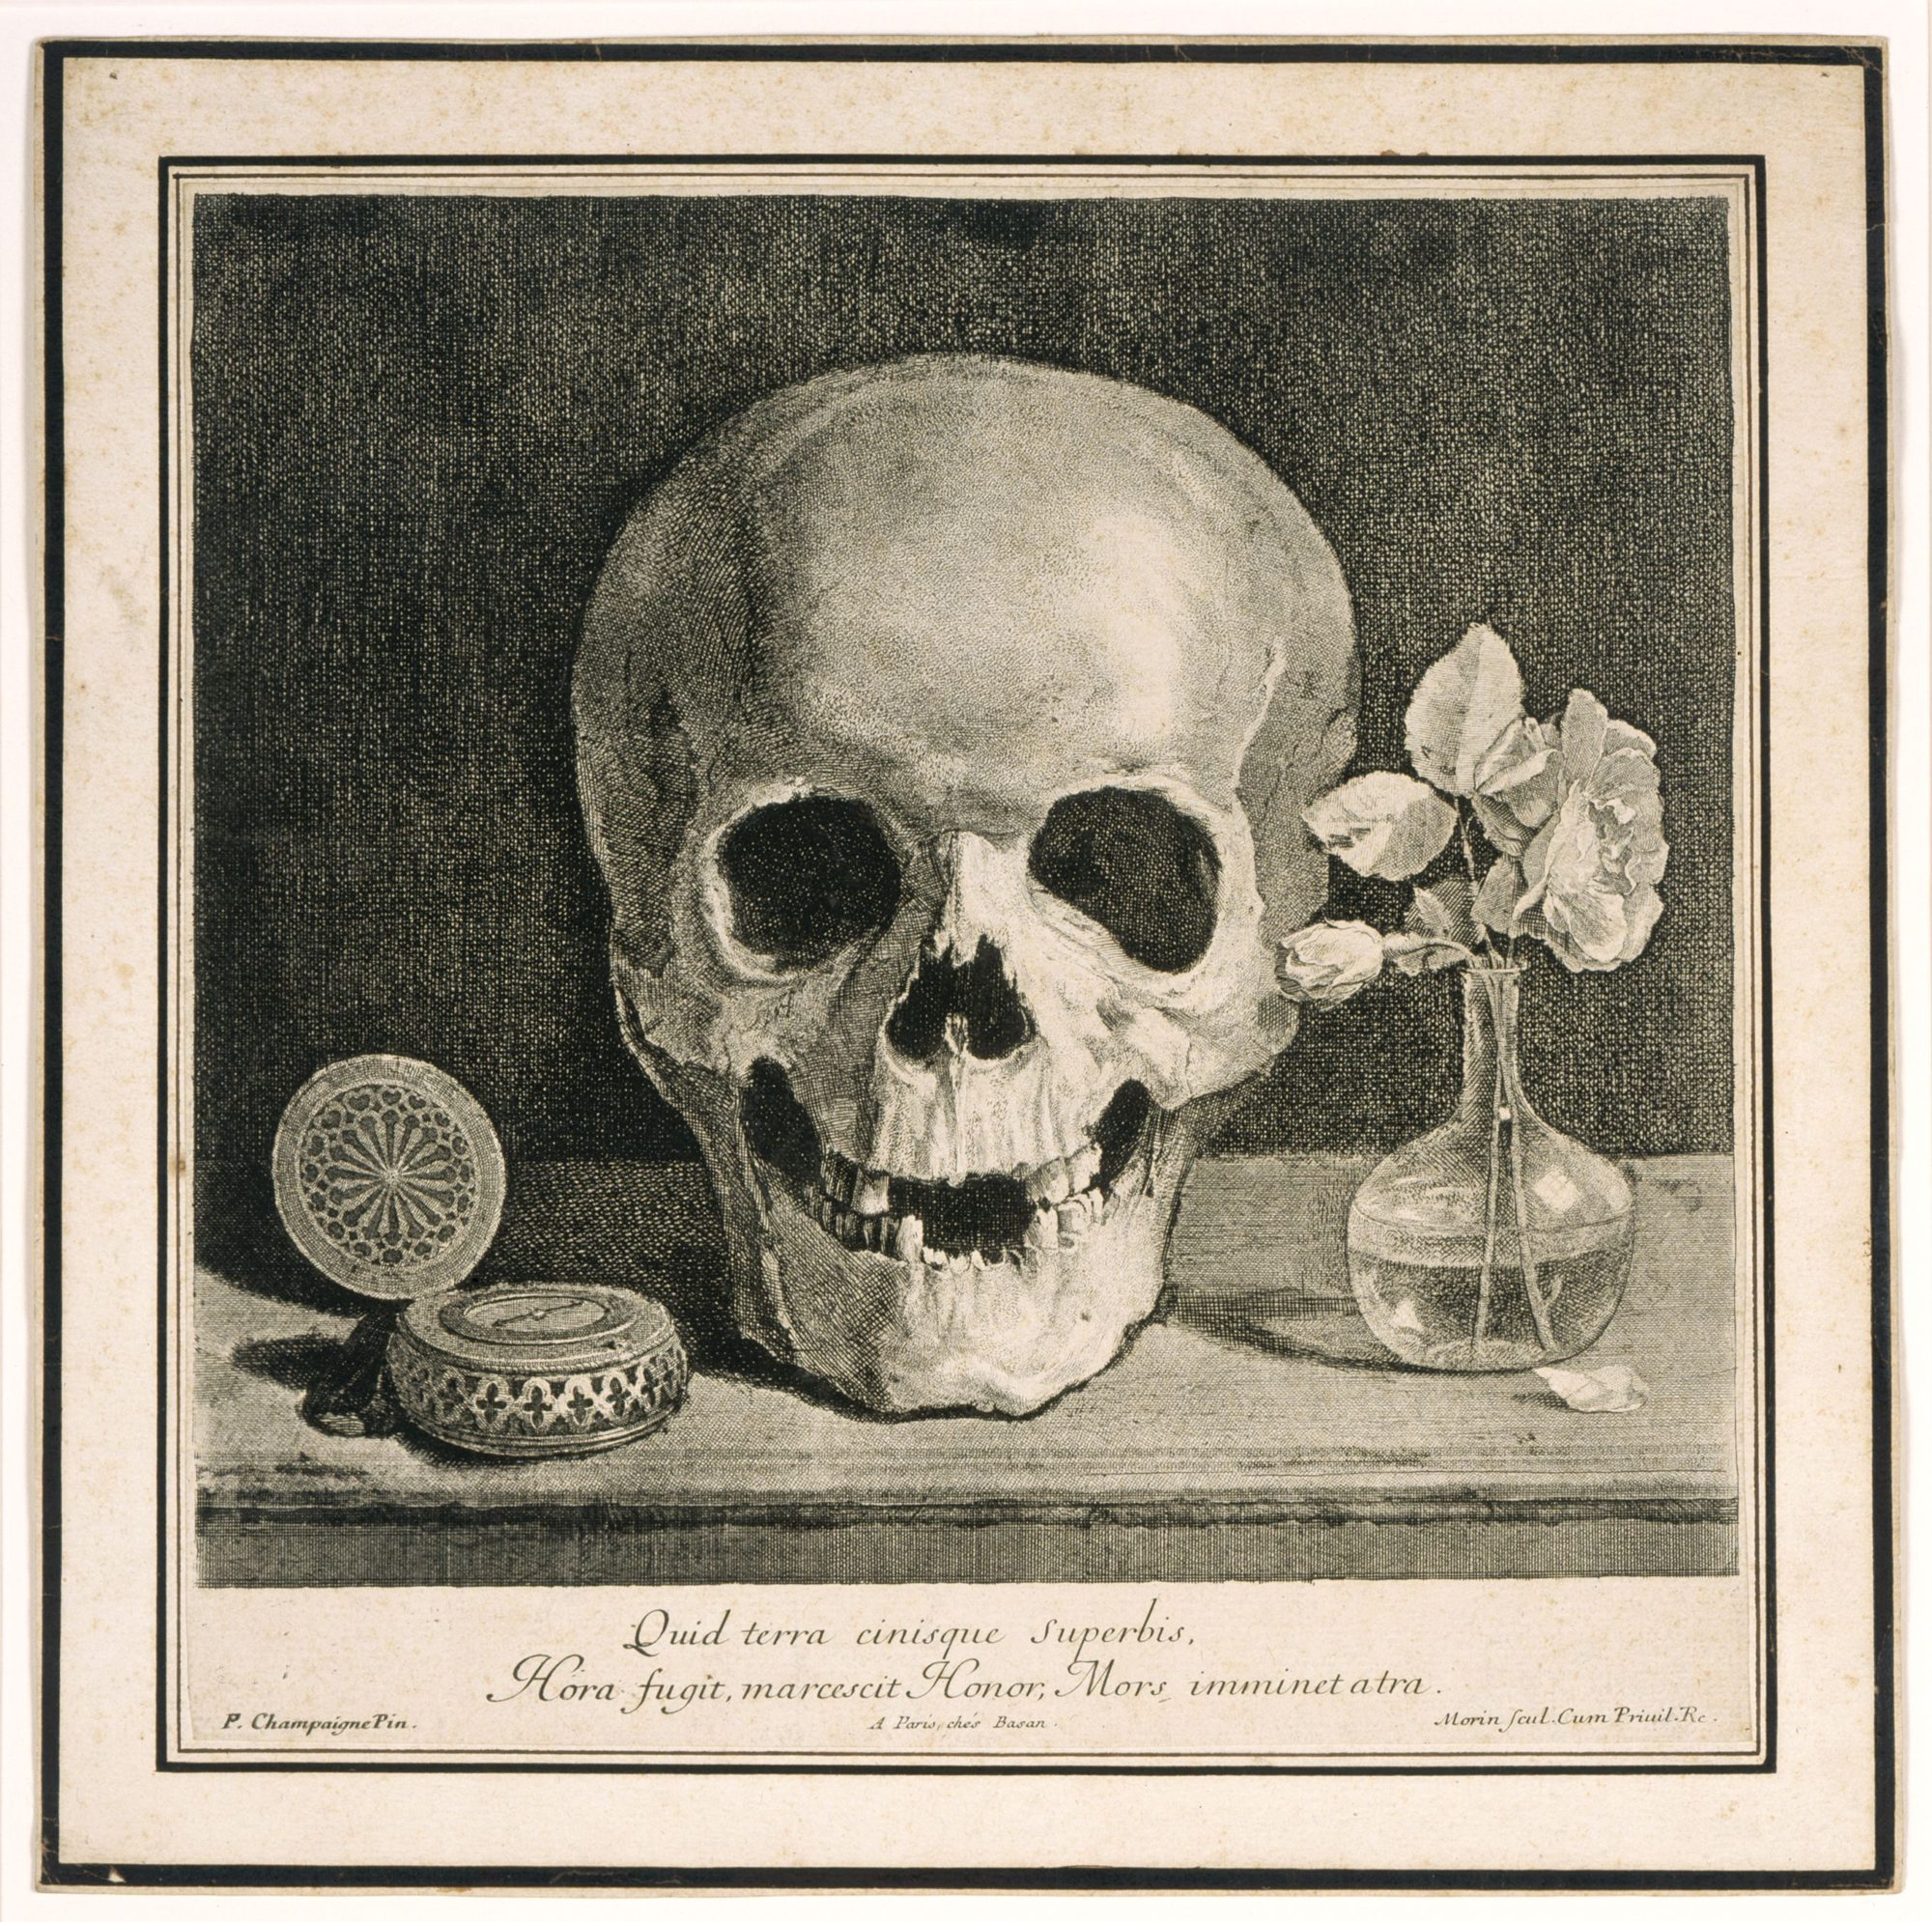 An etching of a human skull that appears to be smiling slightly. It rests on a table flanked on the left side by an open pocket watch, and on the right side by a flower vase with water and two small flowers inside of it.